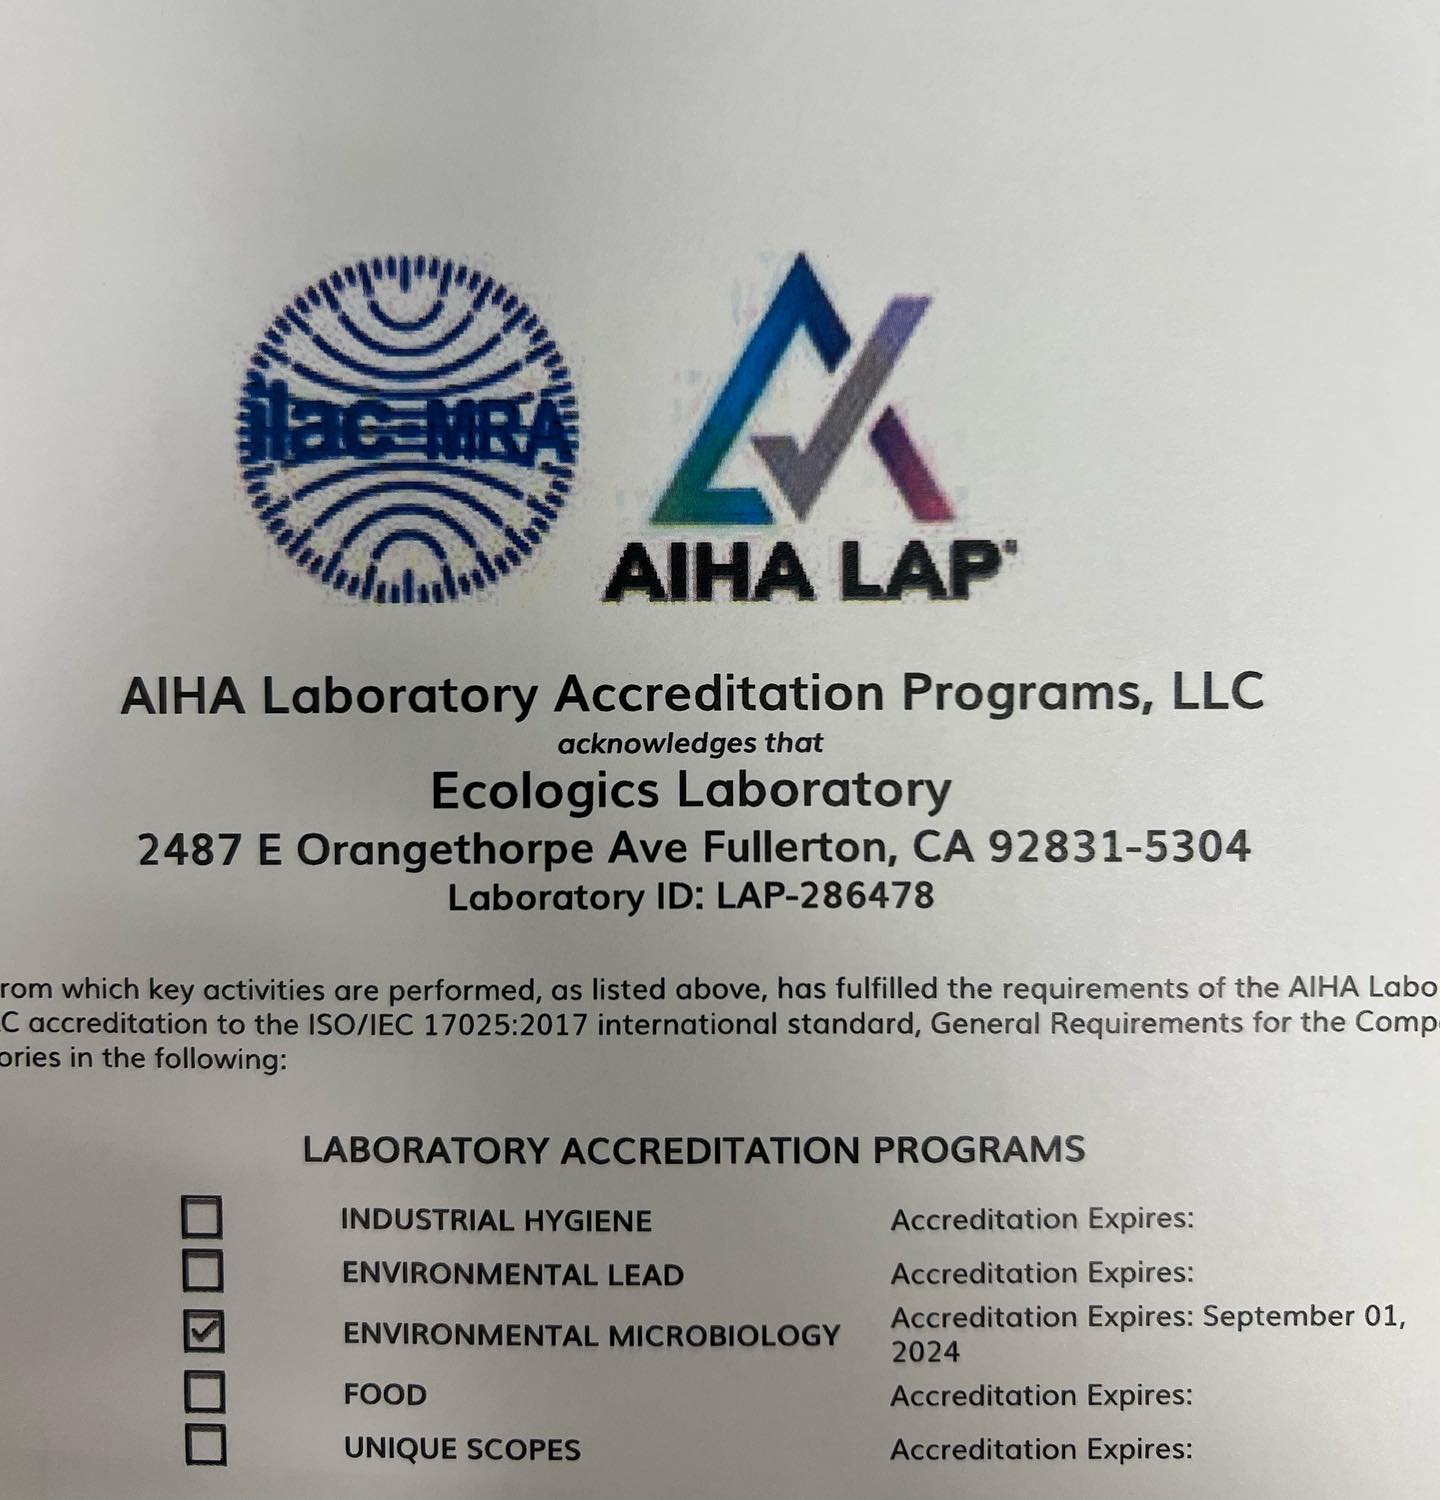 It’s official!! We are AIHA certified for Non-Viable (spore trap, tape lift, bulk) Mold analysis!!!
#mold #fungi #environmentallab #ecologics #microbiology_lab